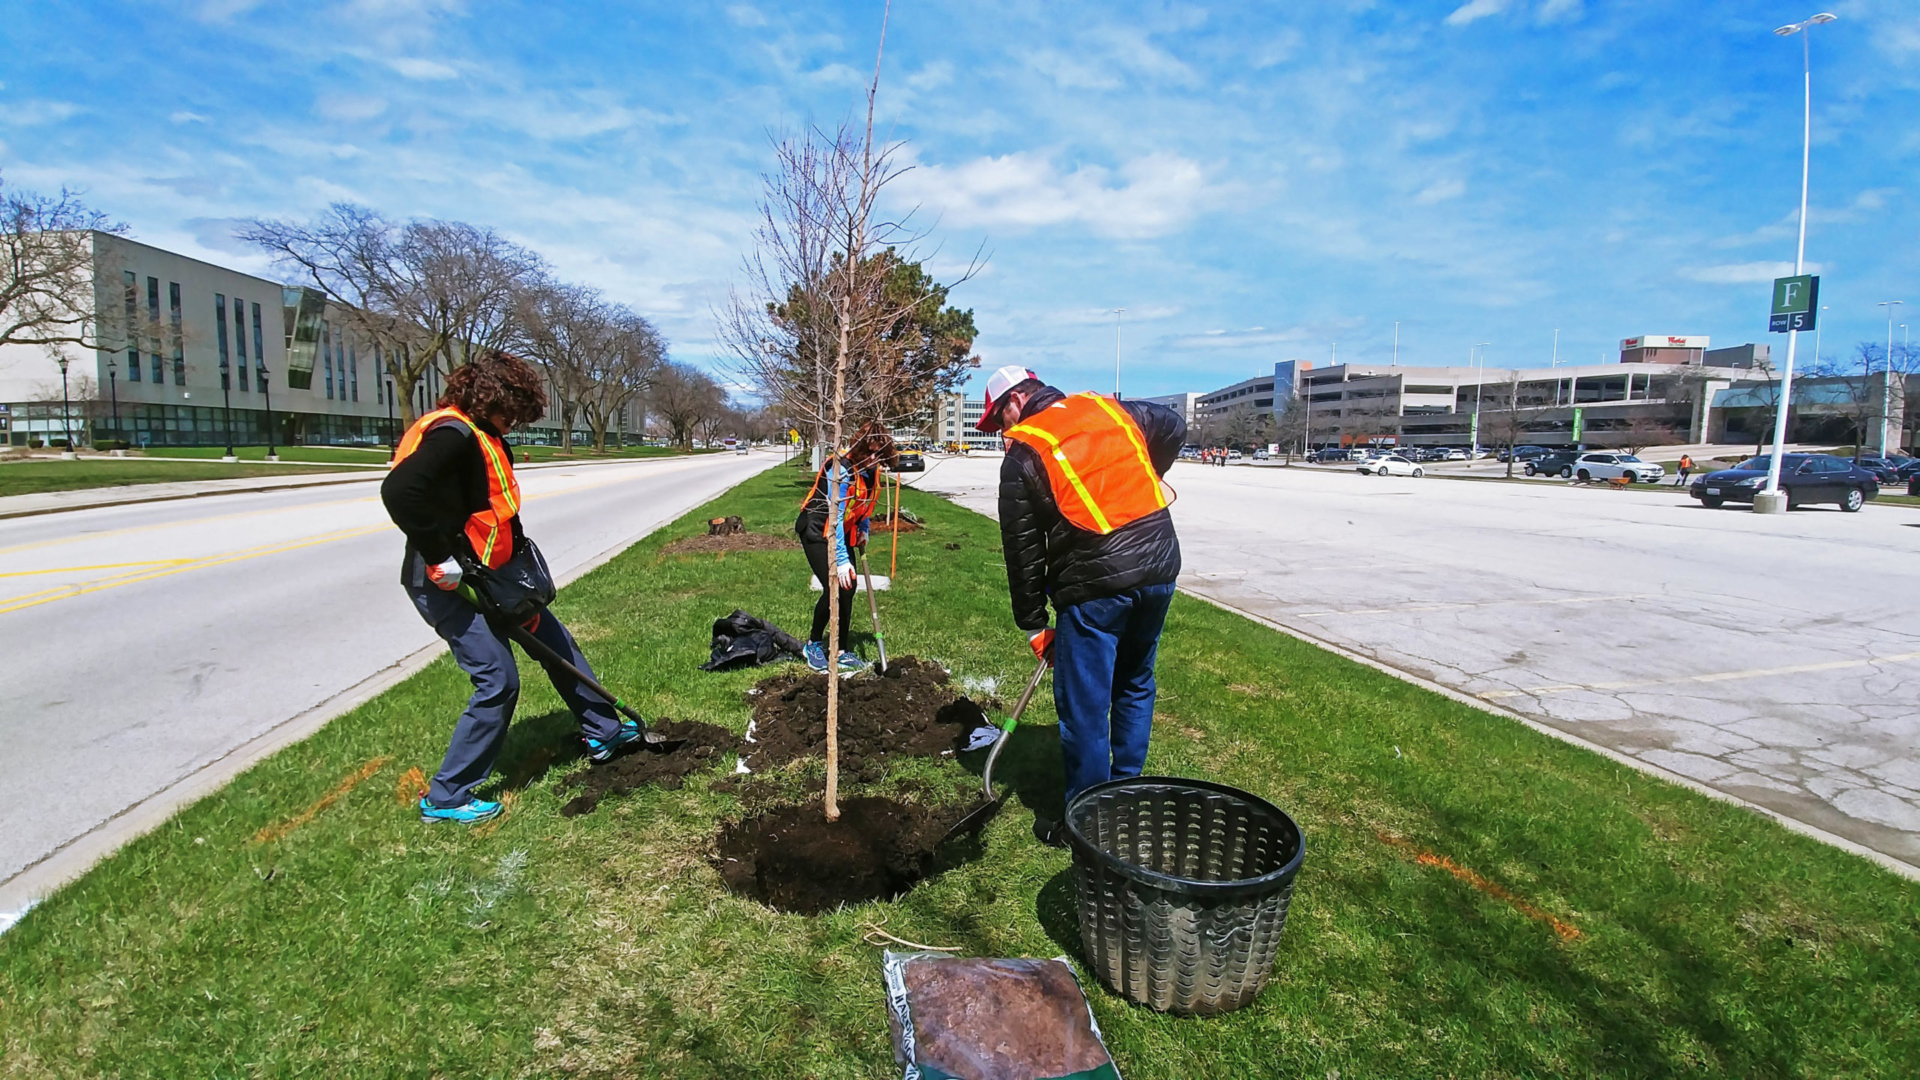 A group plants trees in an industrial area